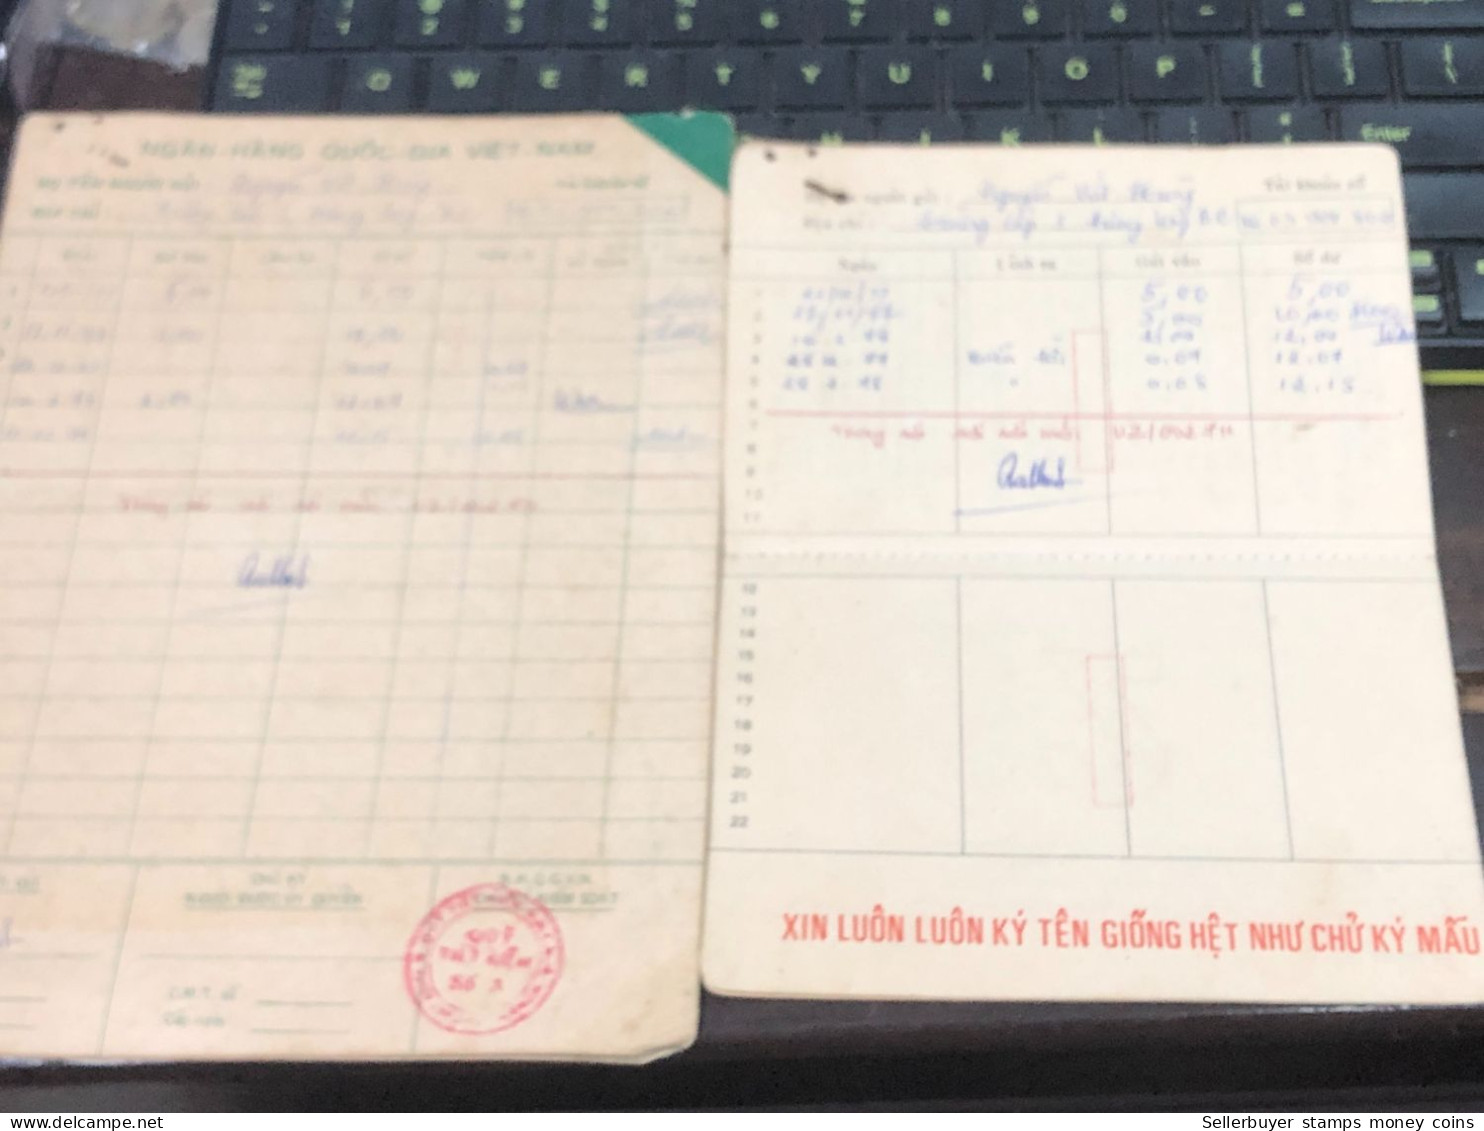 NAM VIET NAM STATE BANK SAVINGS BOOK PREVIOUS -1 976-PCS 1 BOOK OLD - Cheques & Traveler's Cheques